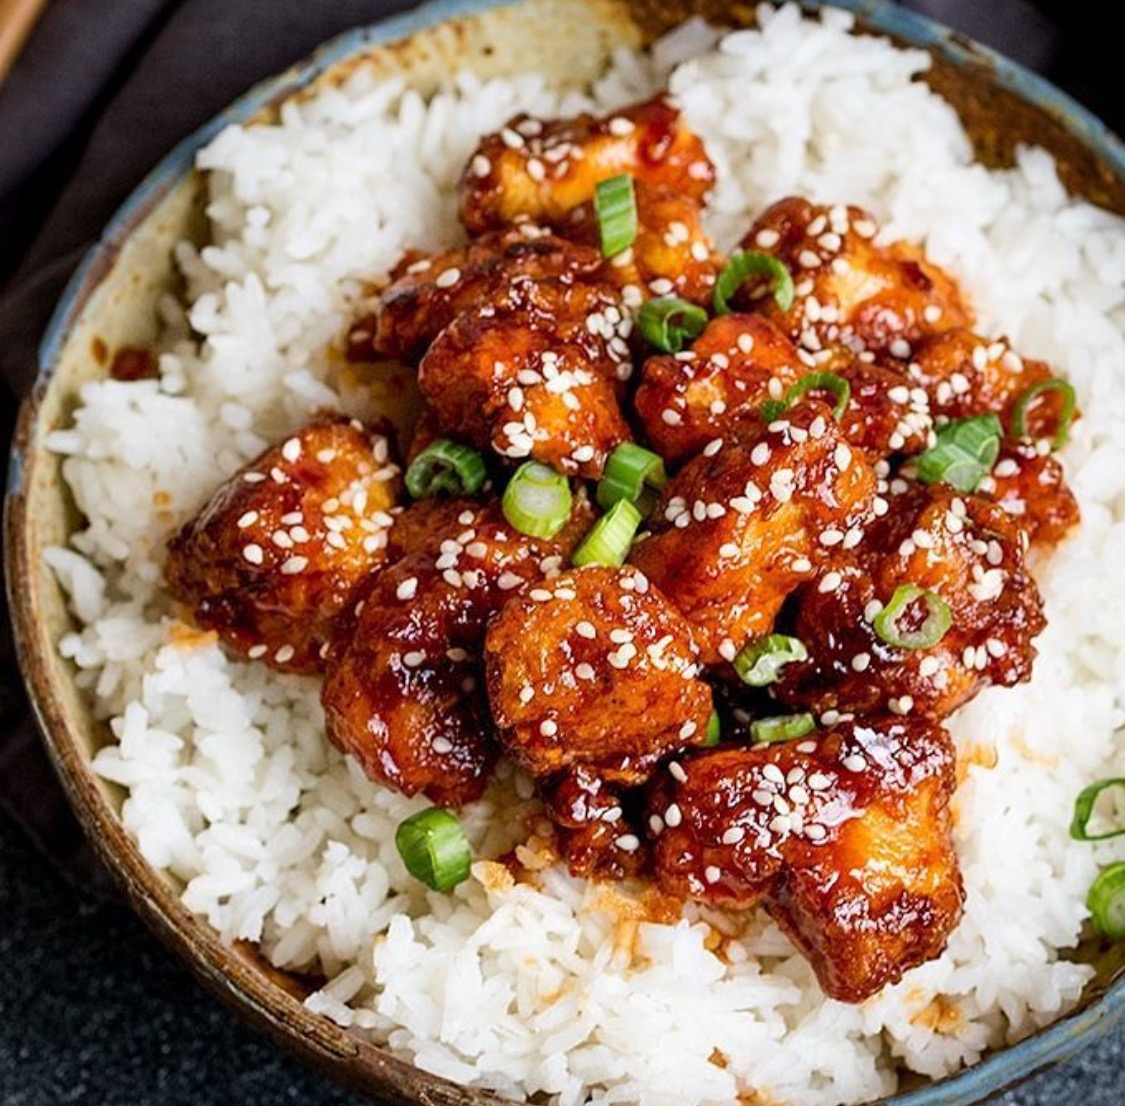 Crispy sesame chicken in sticky Asian sauce is a favourite at home too 